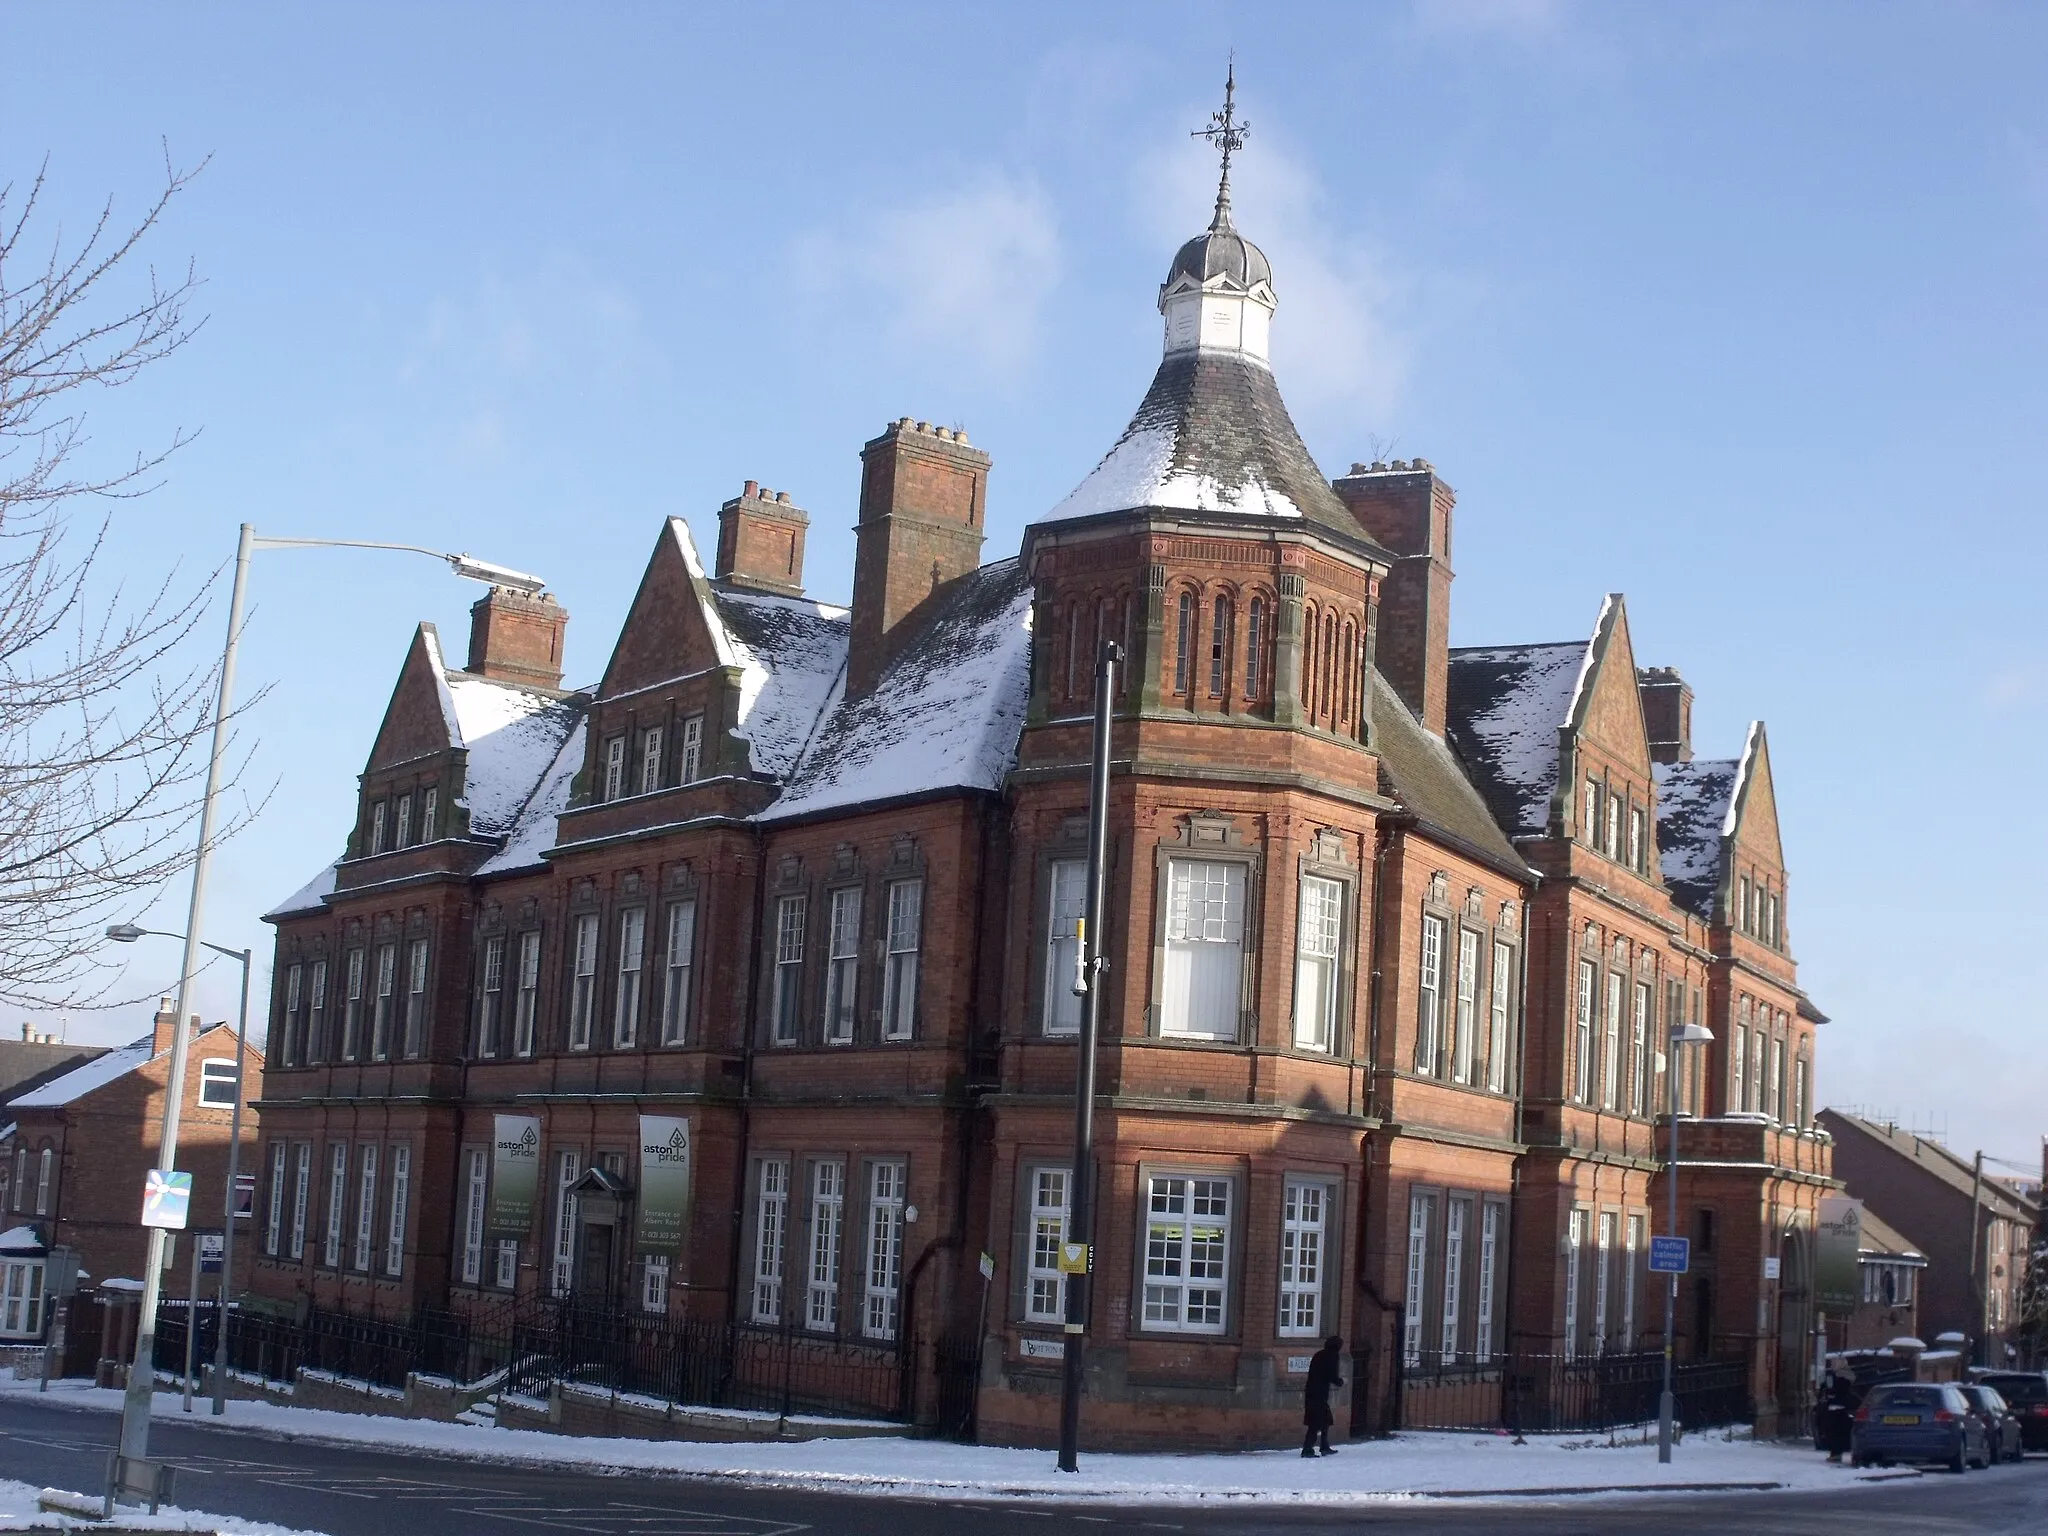 Photo showing: This is Aston Library on the Witton Road in Aston. It was a Free Library that opened in 1882 as the Aston Manor Council Offices and Library.
It is on the corner of Witton Road and Albert Road. The offices of Aston Pride are located within the library.
Aston Pride
Aston Library
It was built for Aston Manor Council in 1882 and was designed by William Henman. It is a two-storey plus attic building of red brick with stone dressings. There is a polygonal corner tower with five bays, each three windows wide, along each street face. The second and fourth bays project and have gables. At the extension of the city boundary in 1911 the building came under the control of Birmingham and it is still used as a library.
(From Victorian Buildings of Birmingham by Roy Thornton).
In Birmingham, Aston Library is locally listed as Grade A.

Birmingham locally listed pdf file